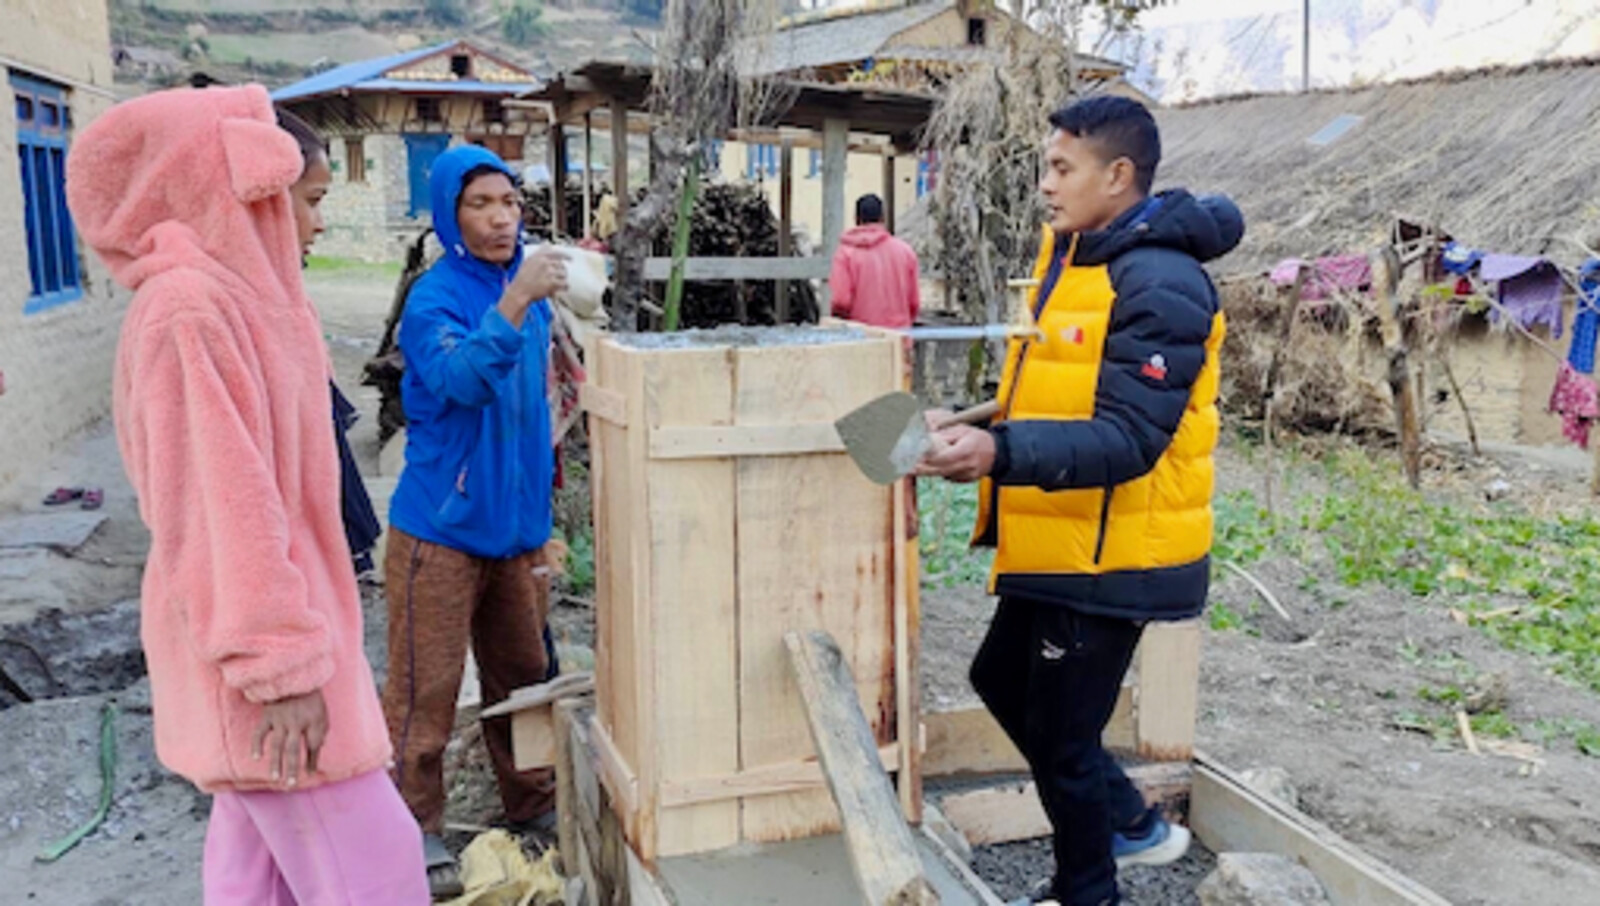 Engineers show local people how to construct a tap in a remote community in Nepal